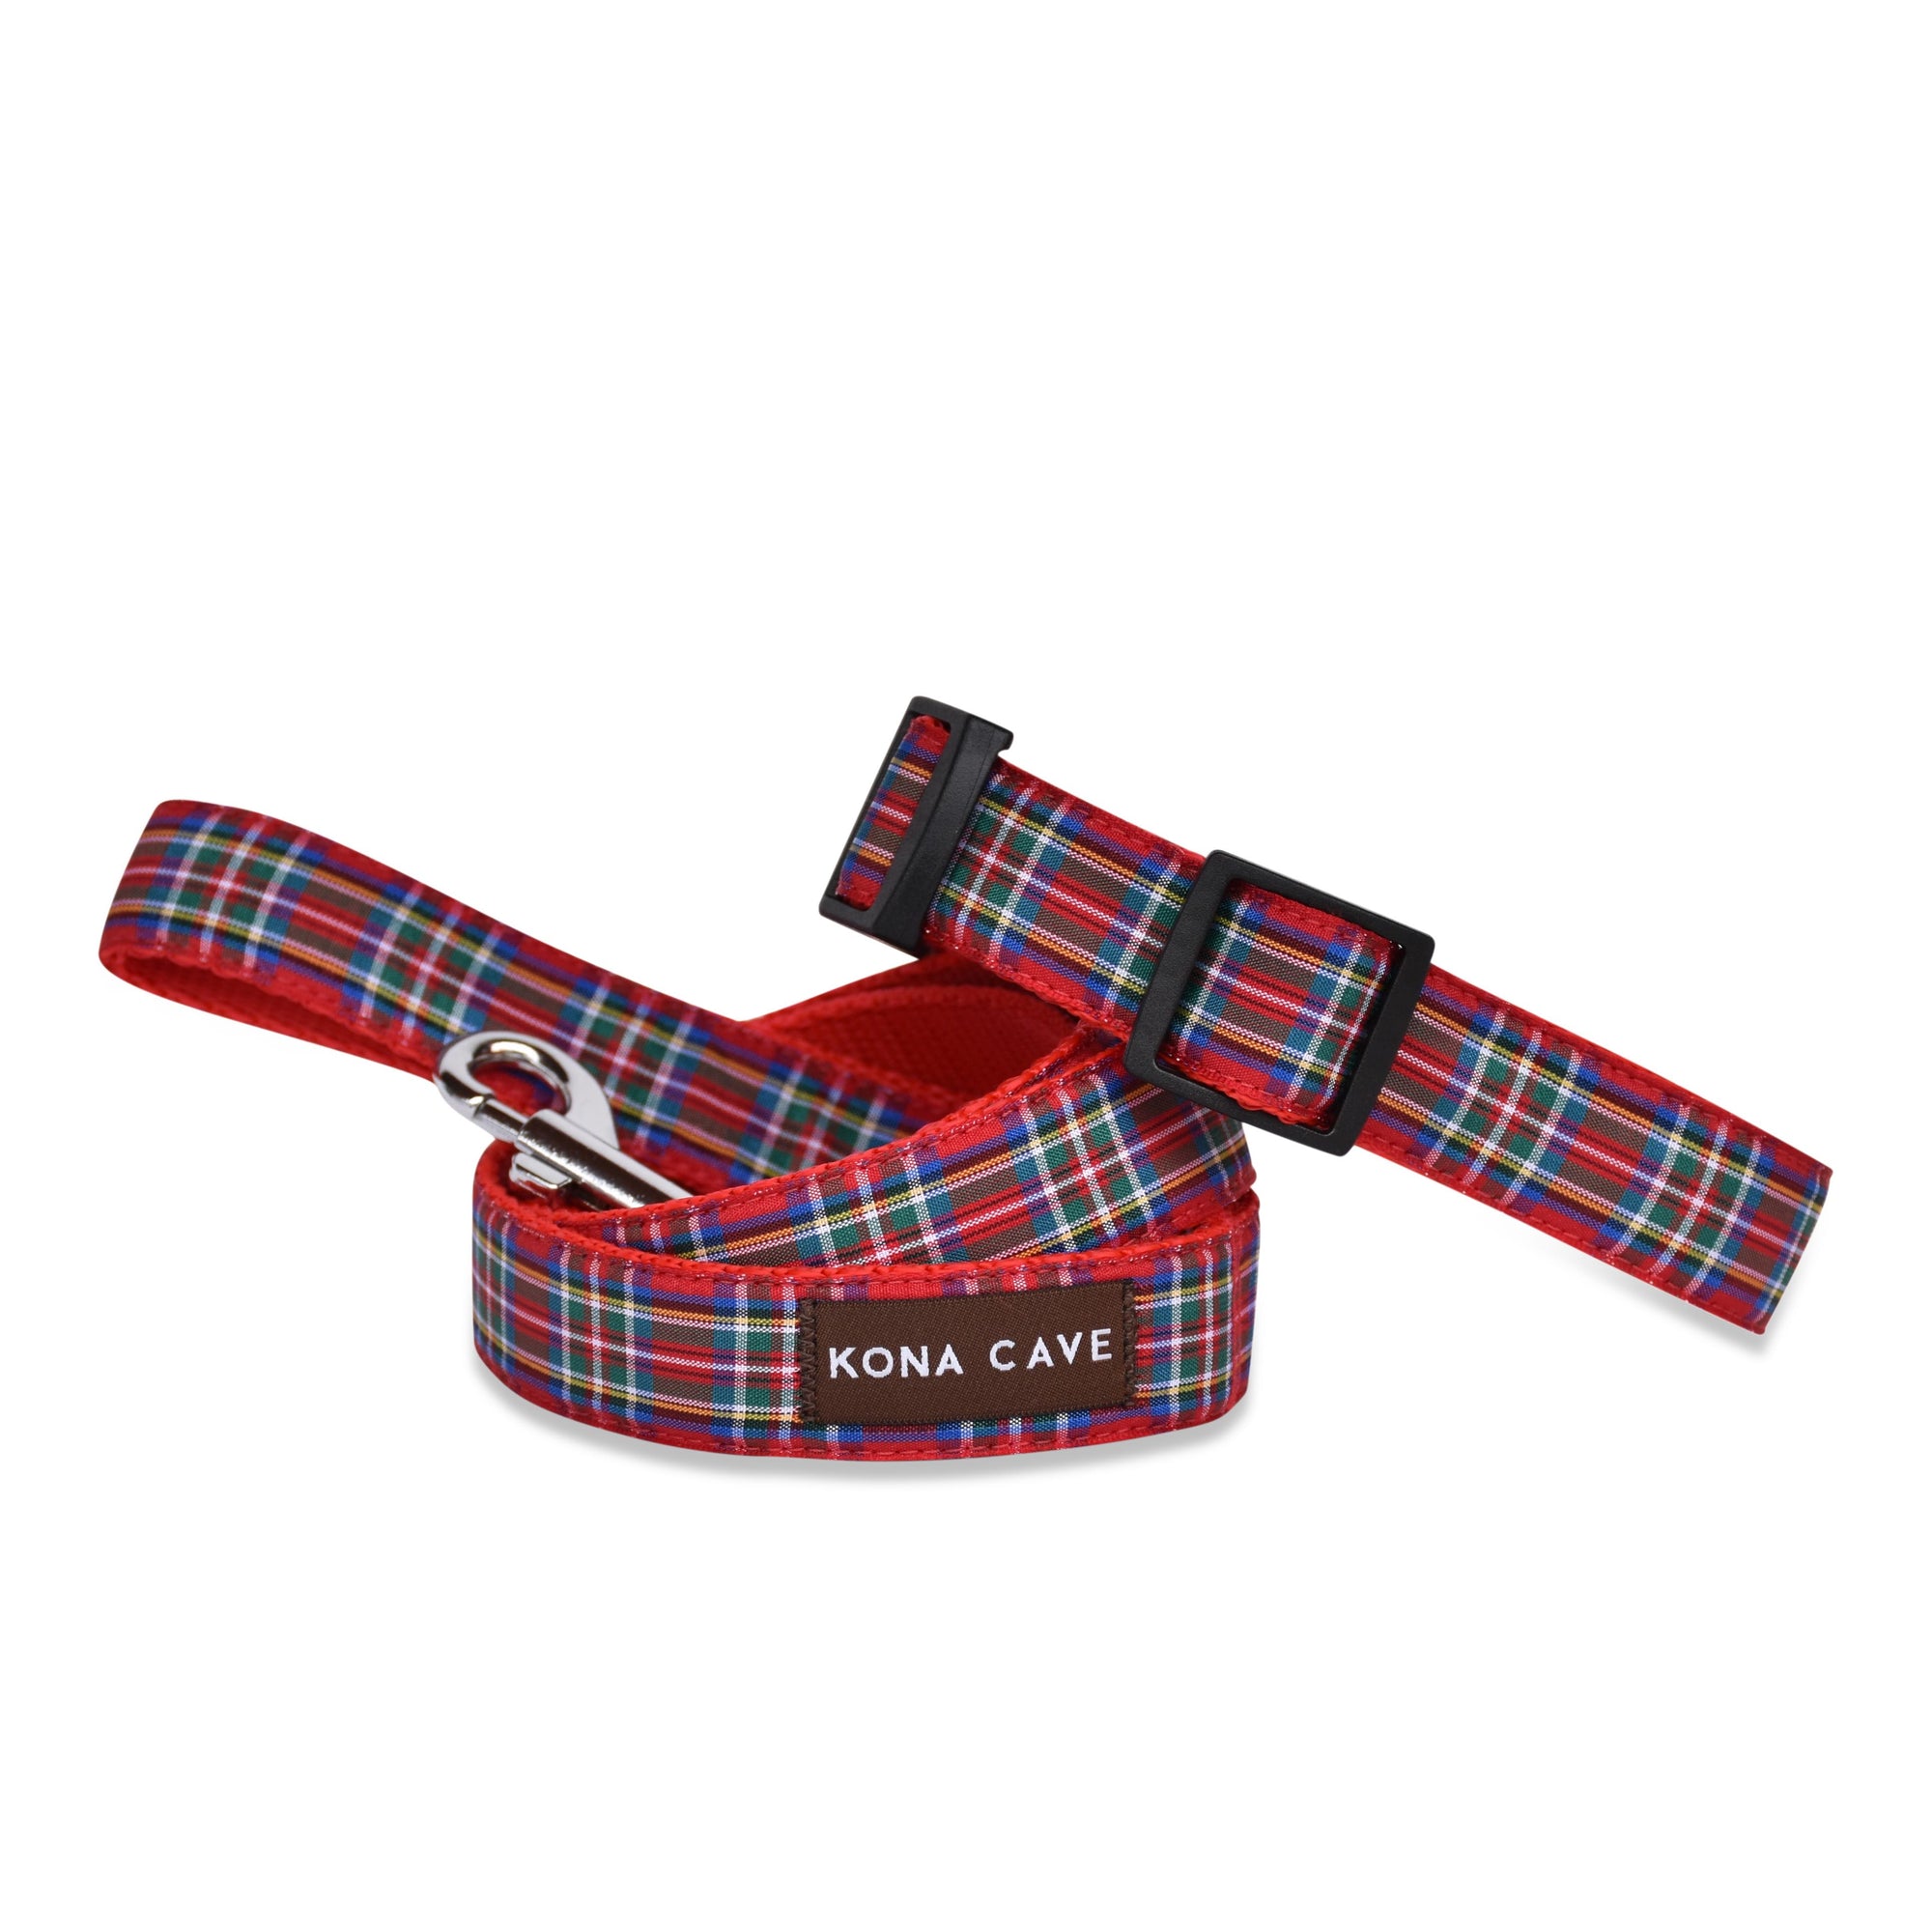  KONA CAVE® red tartan leash and collar. Adjustable length. Authentic Royal Stewart Tartan Ribbon on Red nylon leash.  Extra Clip and D-ring to shorten leash or attach poop bags, etc. 